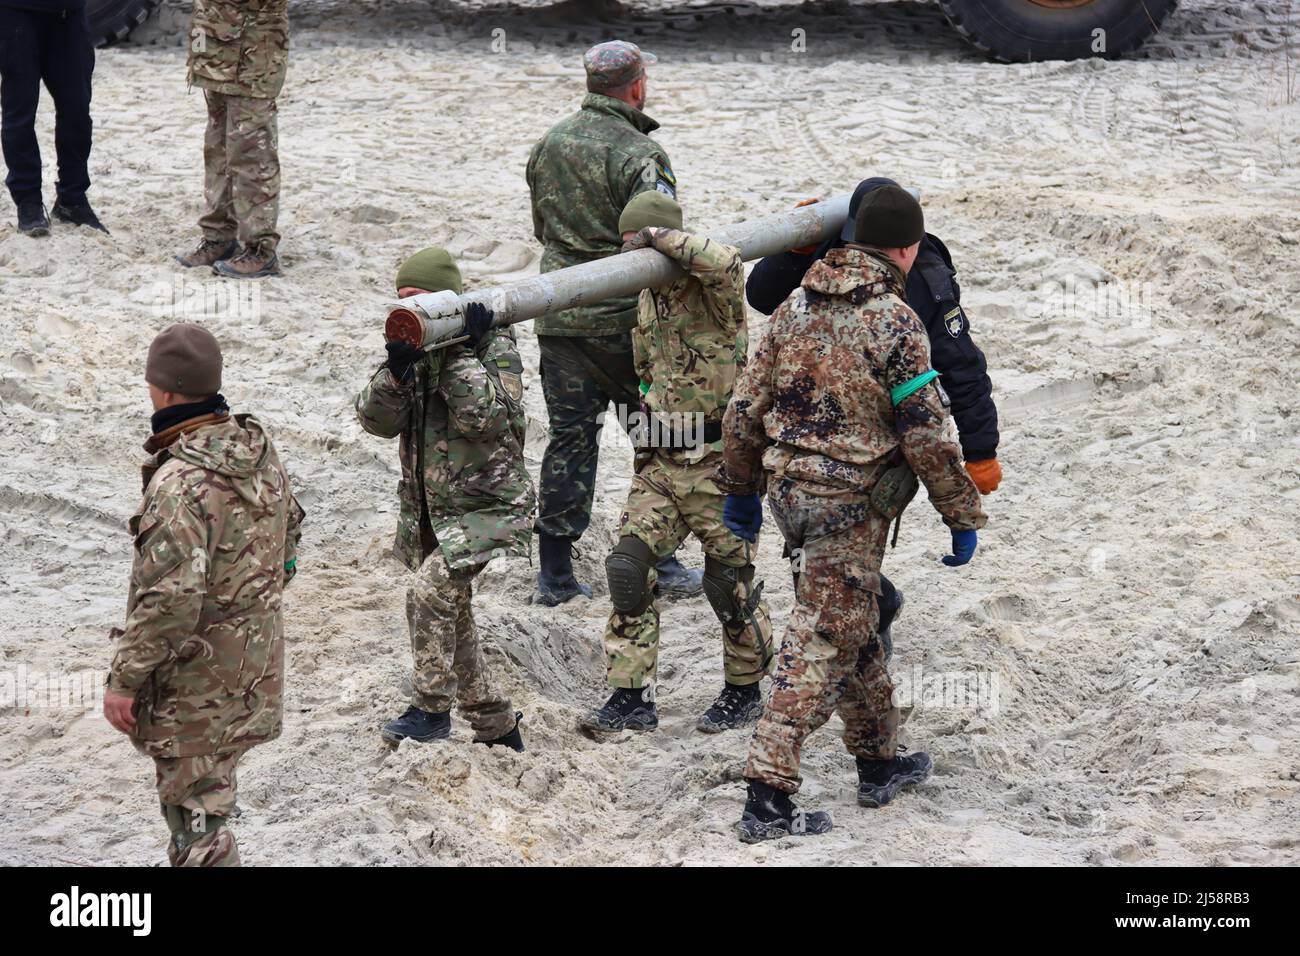 KYIV REGION, UKRAINE - APRIL 20, 2022 - Servicemen carry a shell as they work to dispose of ammunition collected in the territories liberated from Rus Stock Photo